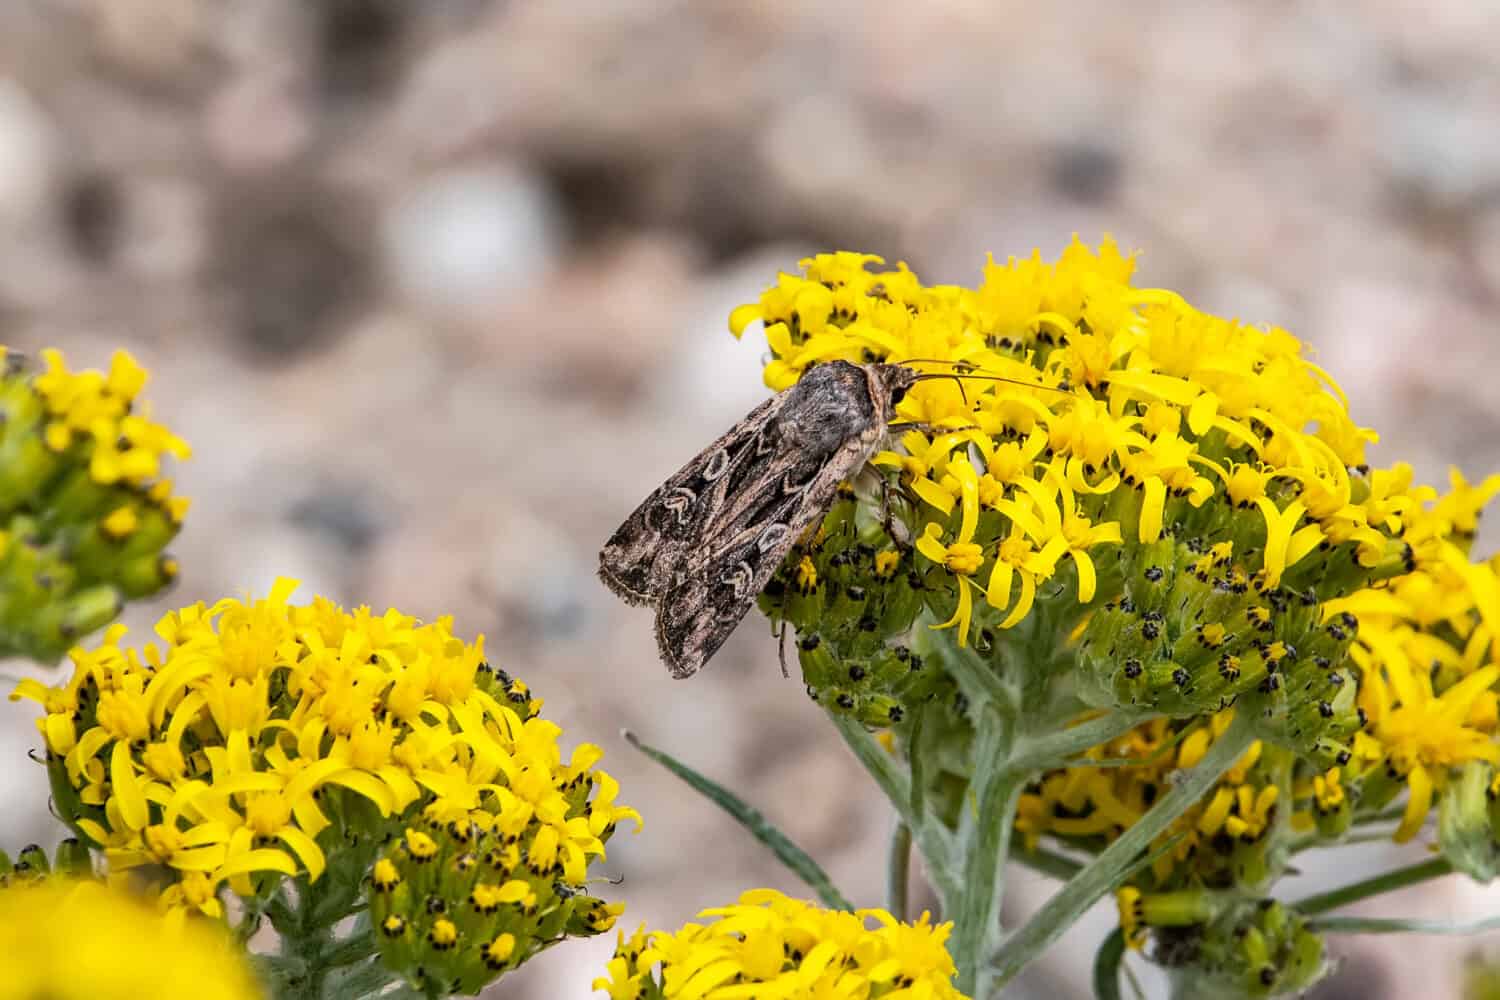 Army cutworm moth also known as the miller moth